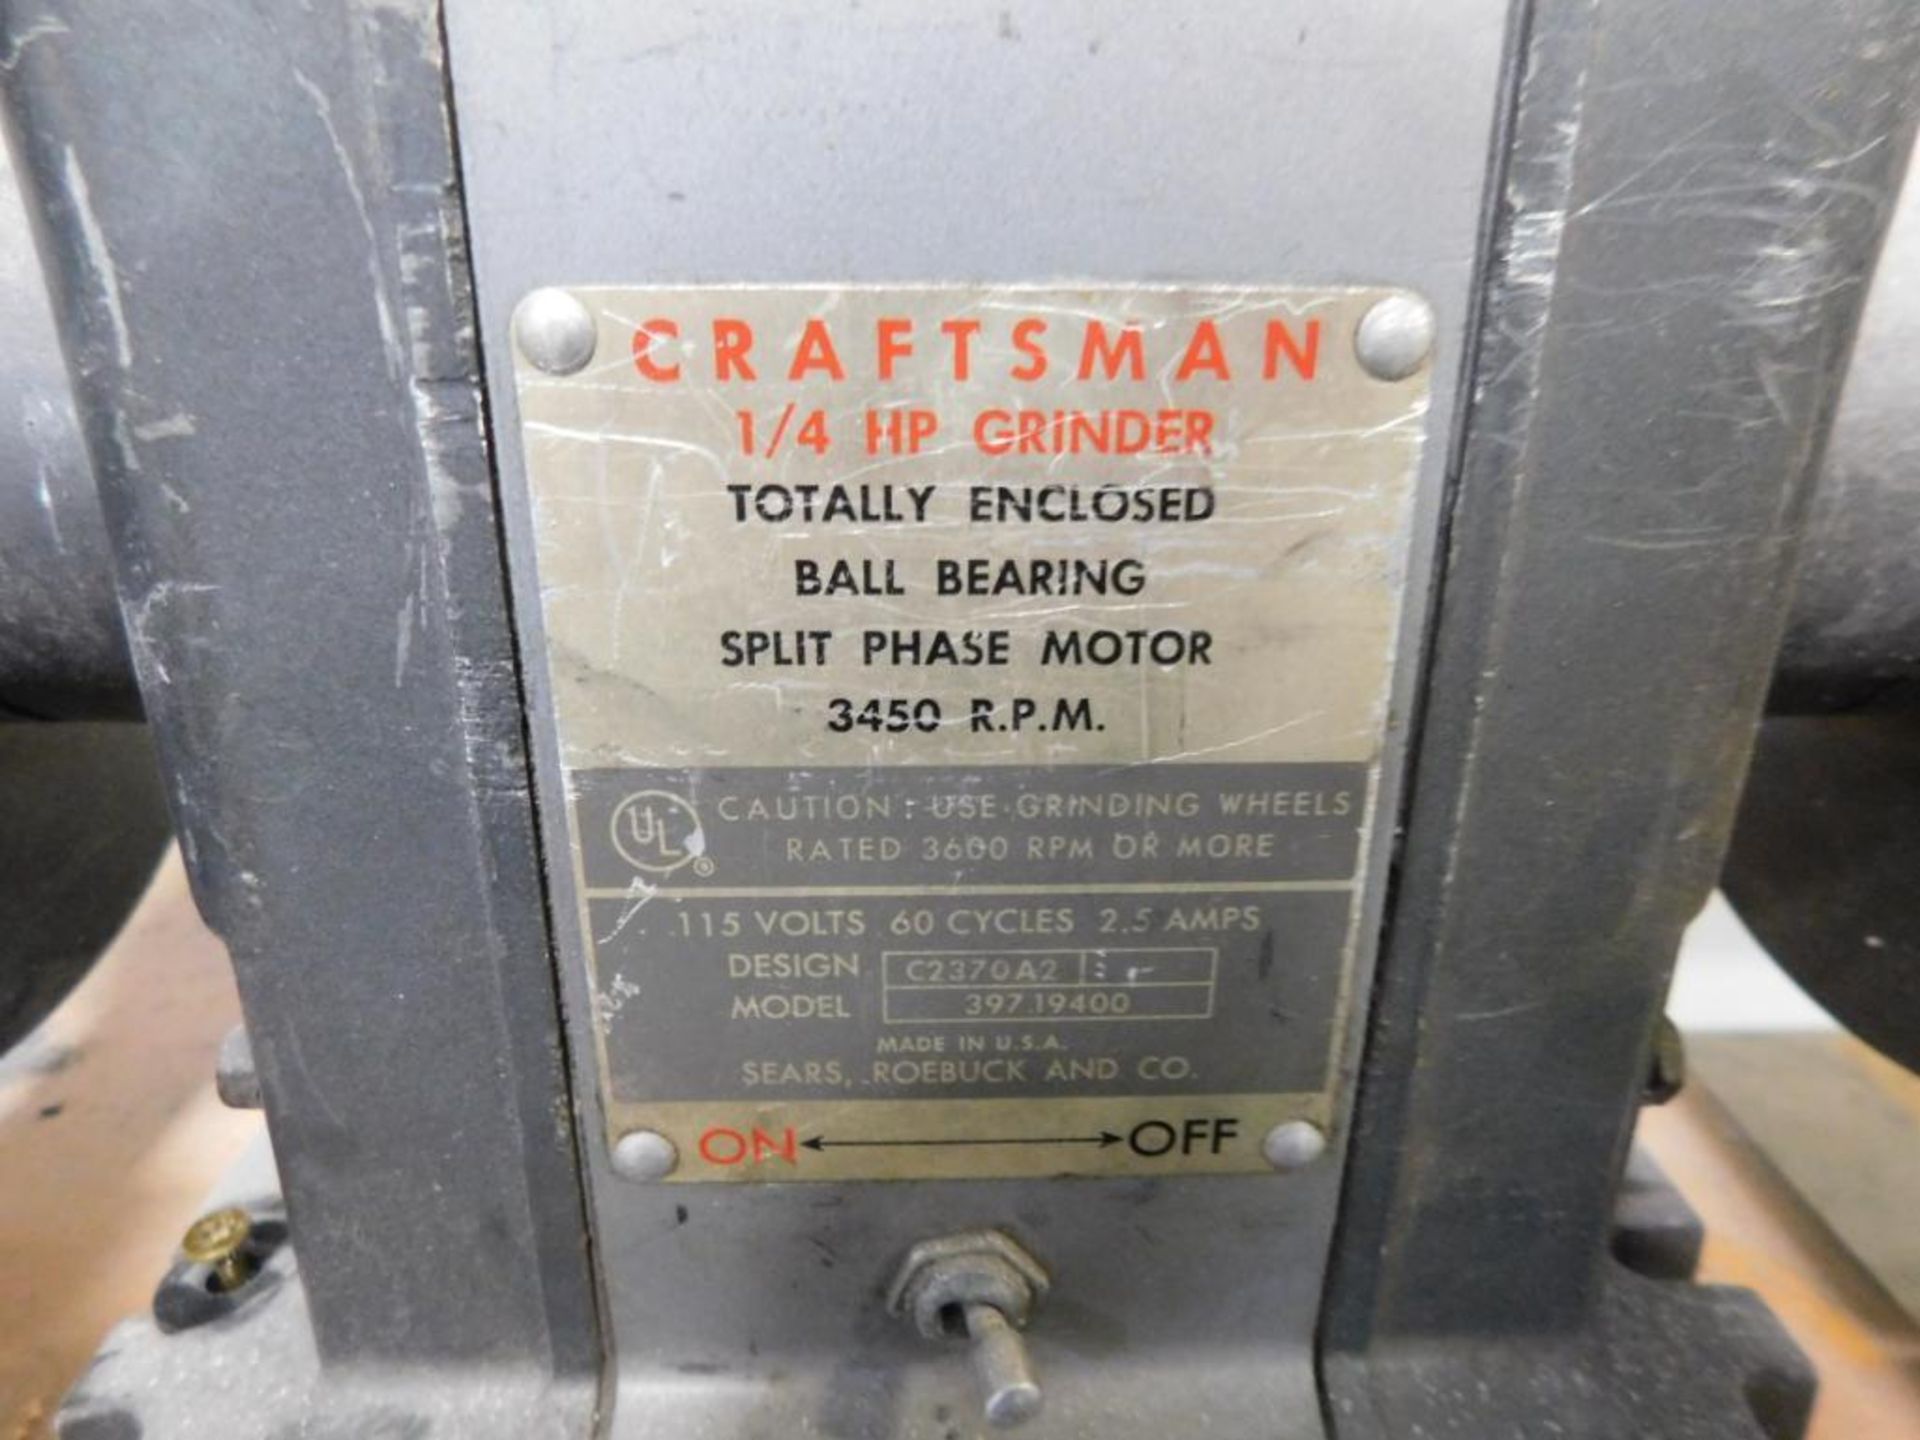 Craftsman 1/4 HP Double-Edge Grinder (LOCATED IN MINNEAPOLIS, MN.) - Image 2 of 2